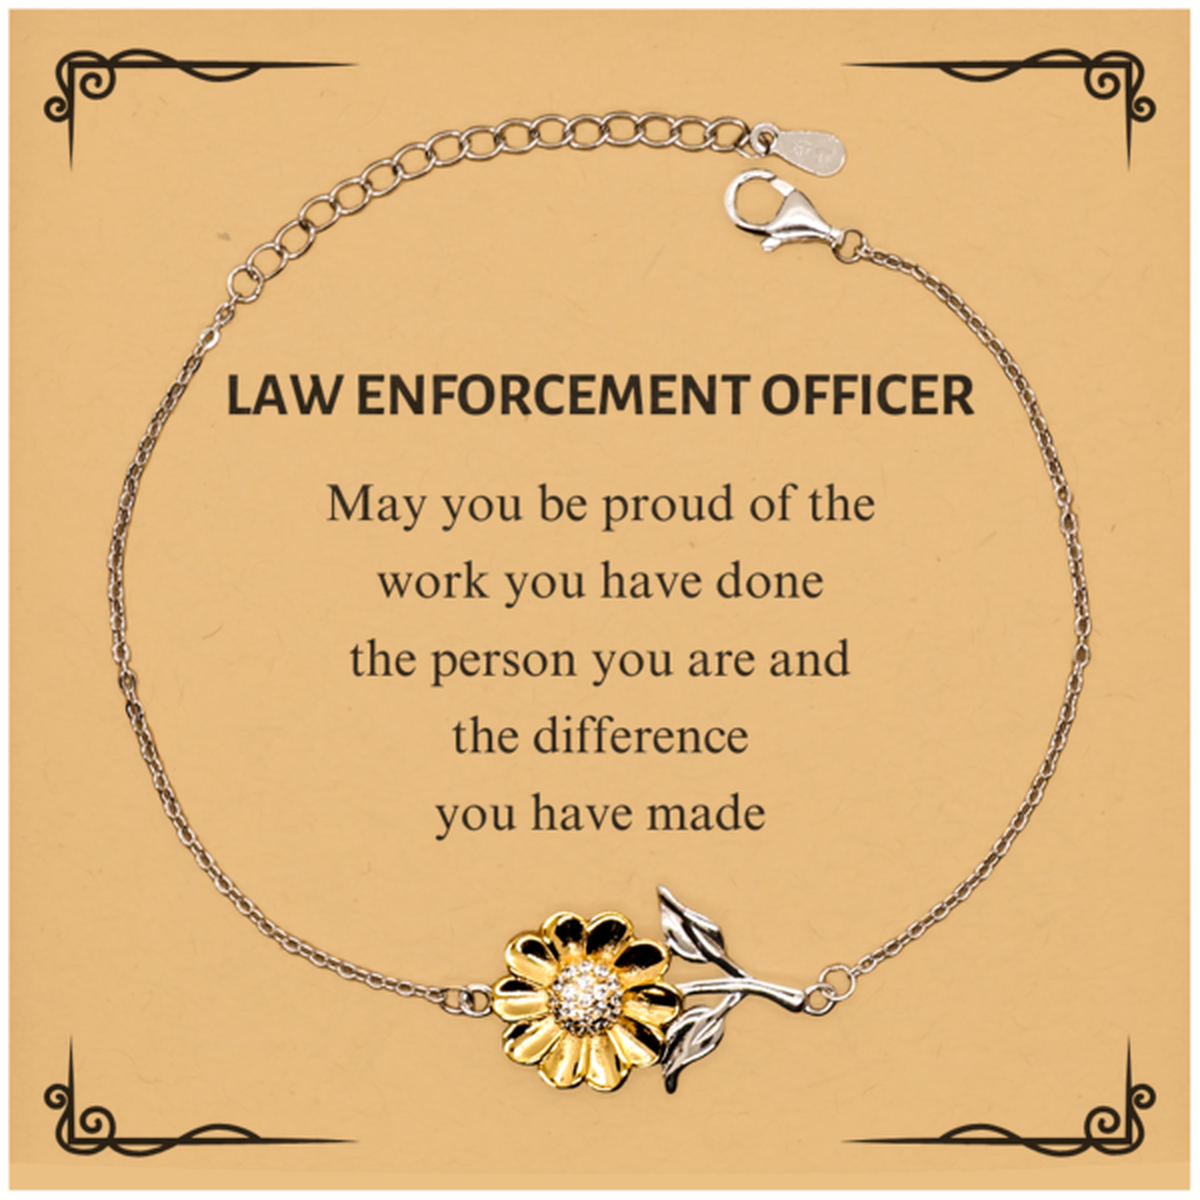 Law Enforcement Officer May you be proud of the work you have done, Retirement Law Enforcement Officer Sunflower Bracelet for Colleague Appreciation Gifts Amazing for Law Enforcement Officer